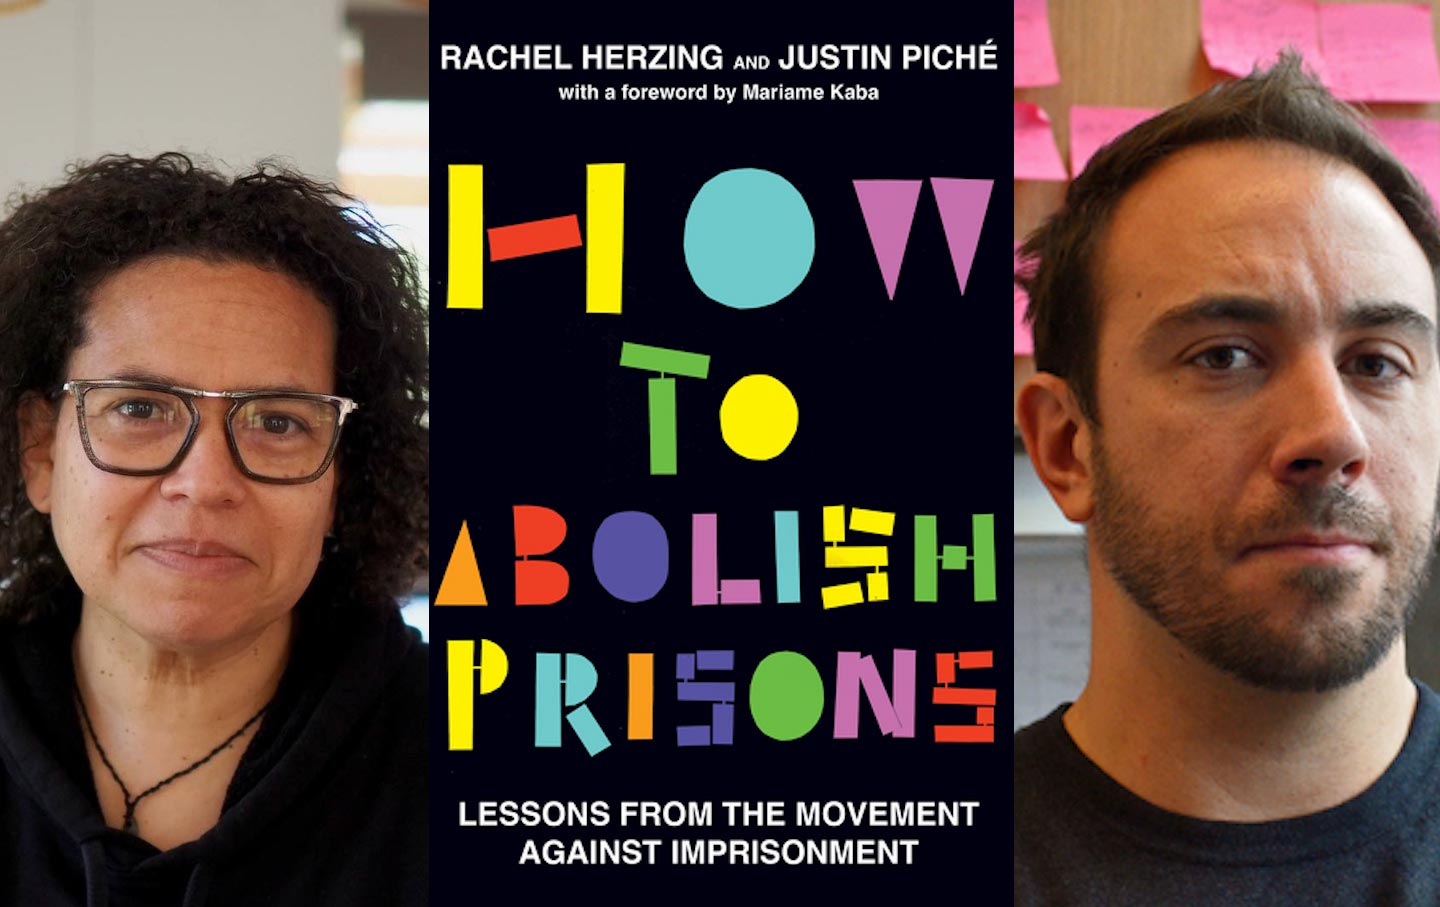 Rachel Herzing and Justin Piché, authors of the new book “How to Abolish Prisons: Lessons from the Movement against Imprisonment.”